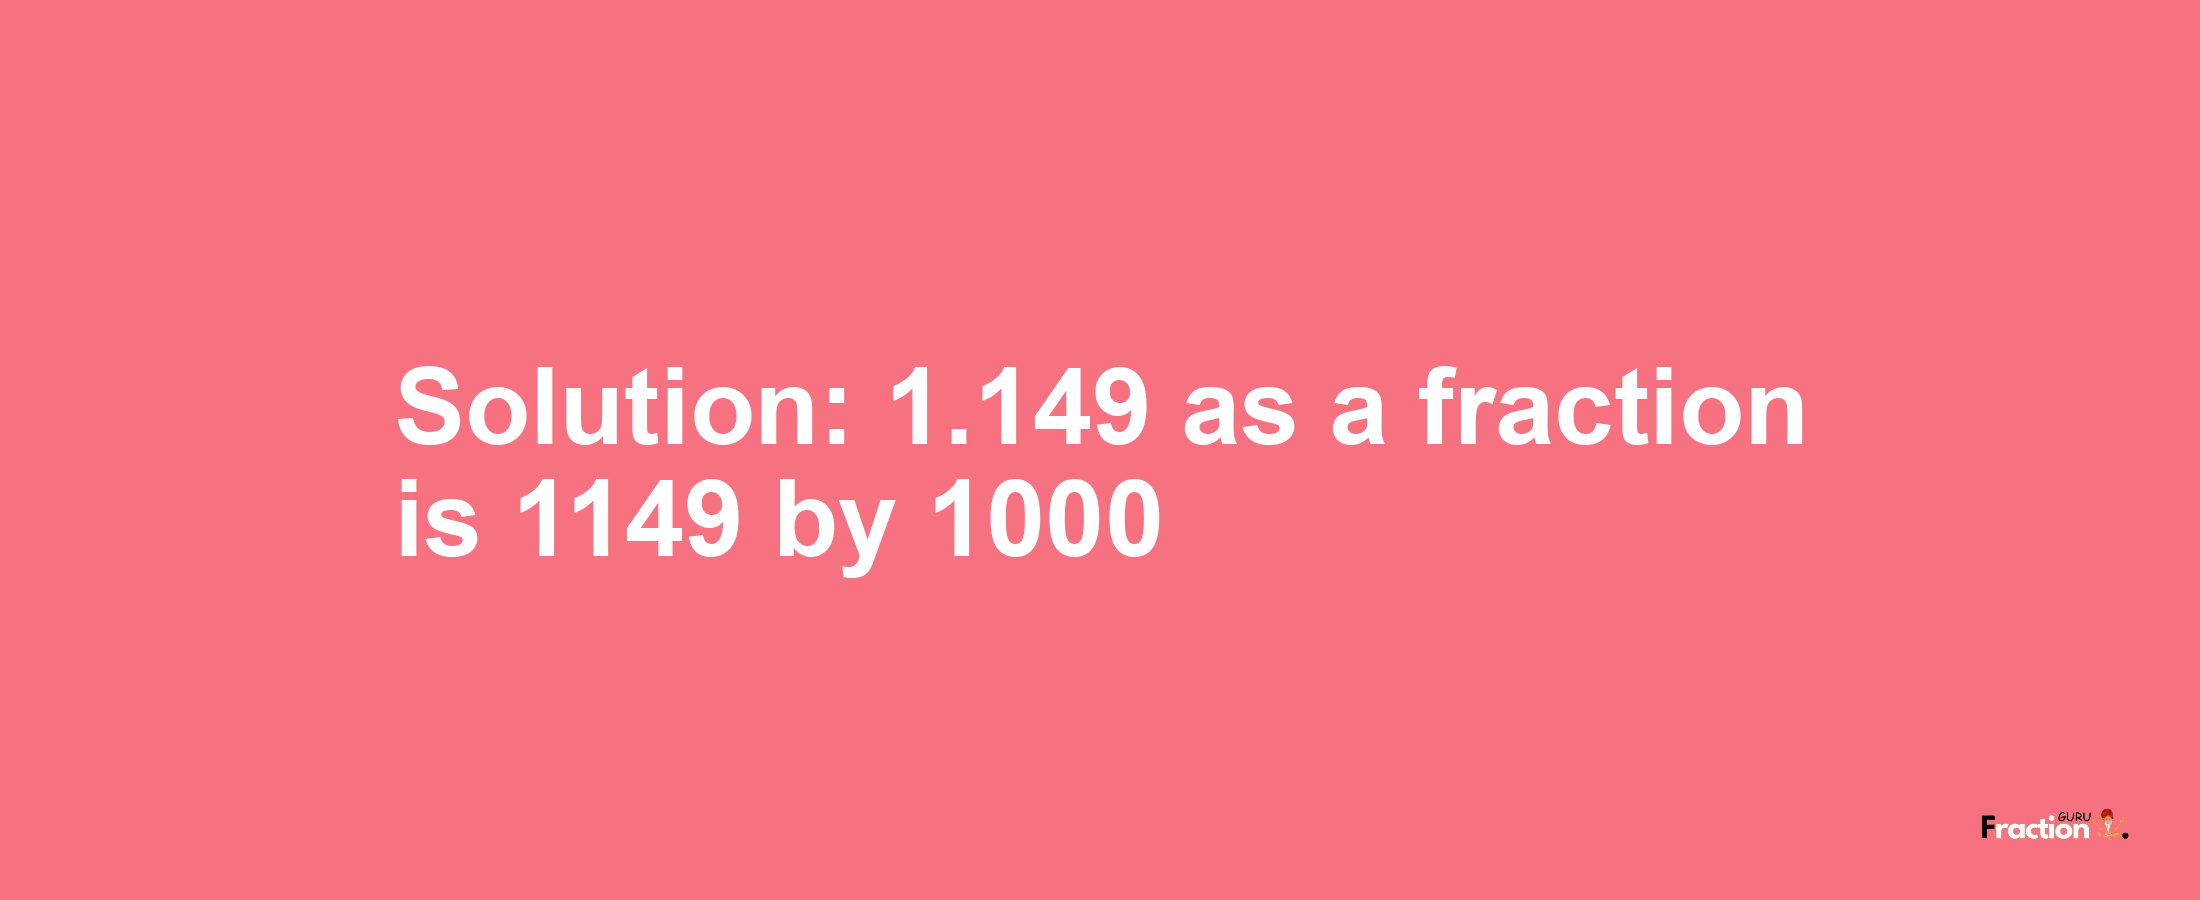 Solution:1.149 as a fraction is 1149/1000